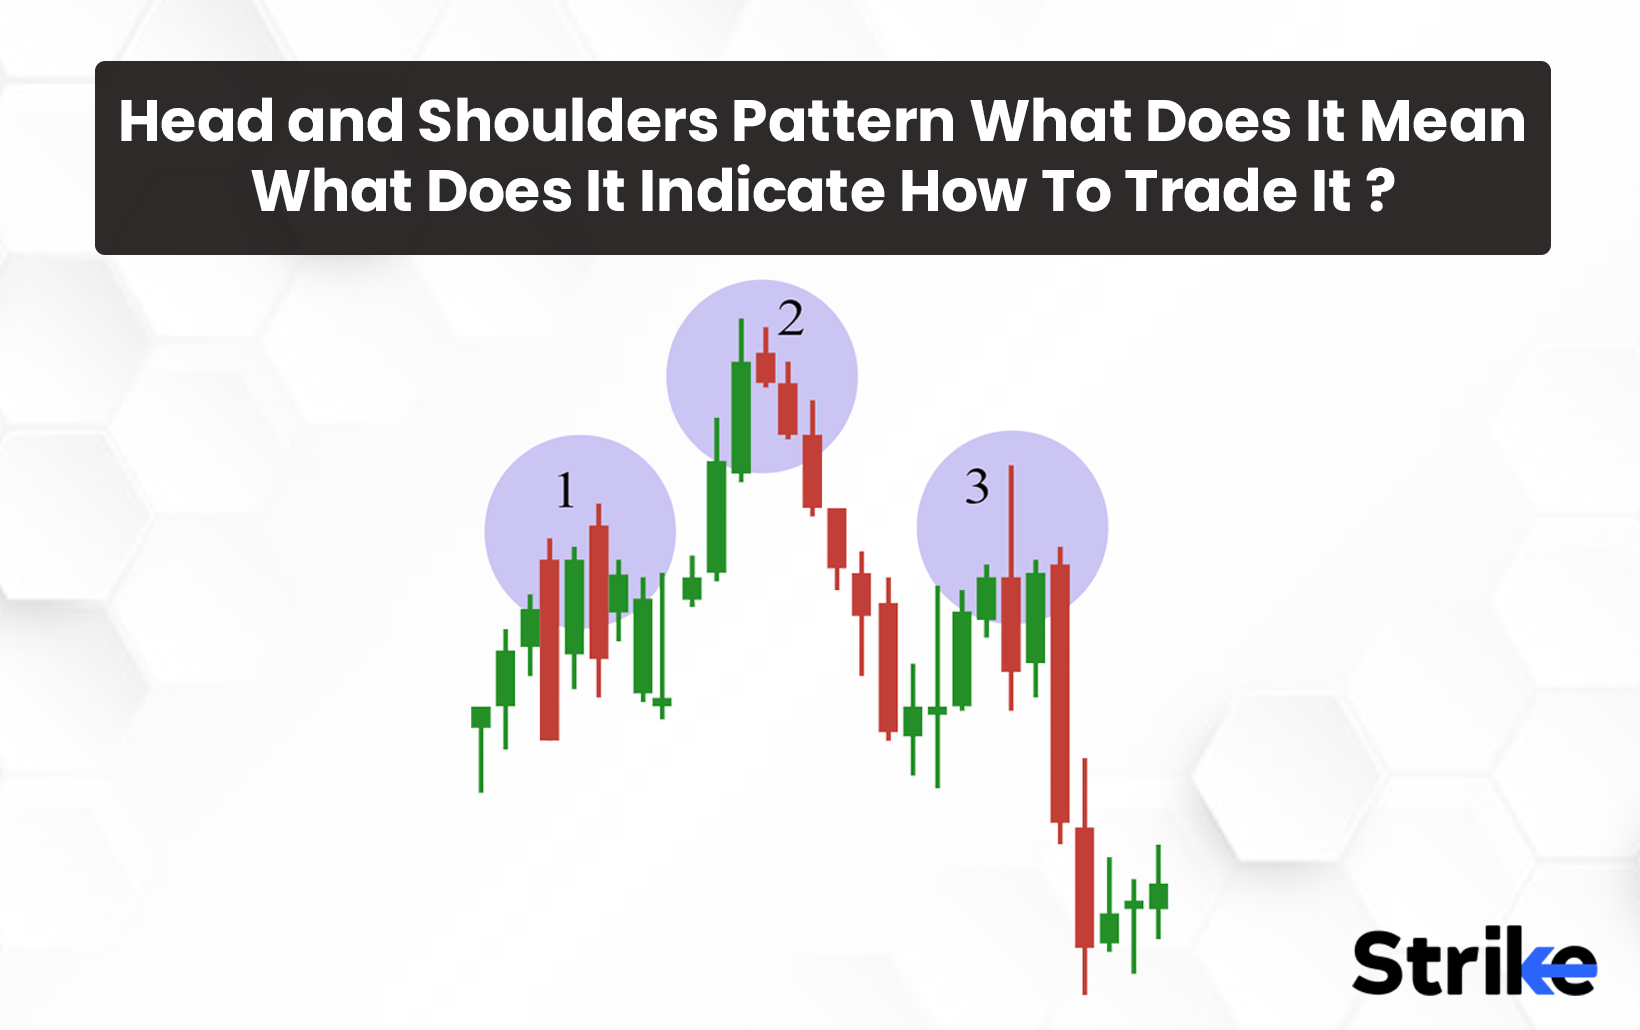 Head and Shoulders Pattern: What Does It Mean? What Does It Indicate? How To Trade It?